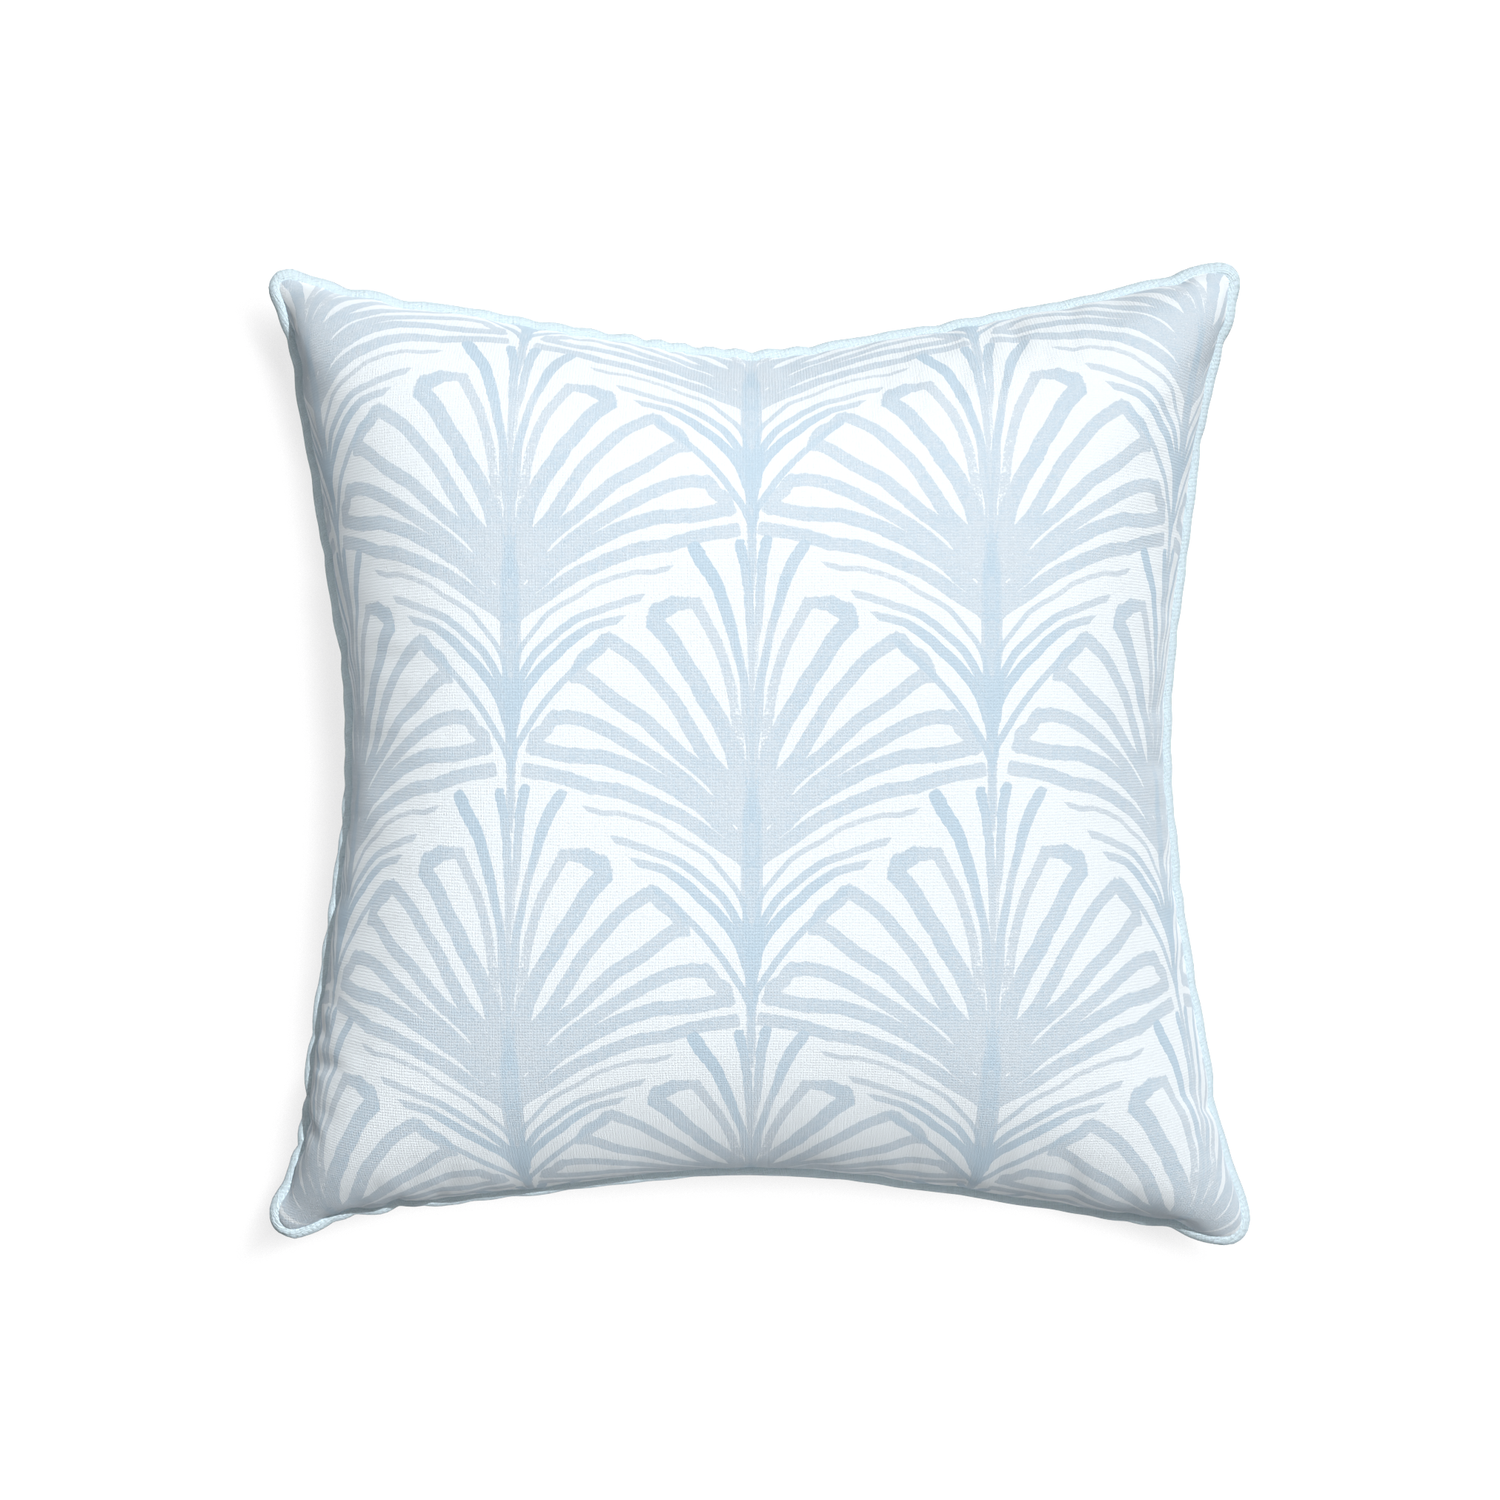 22-square suzy sky custom pillow with powder piping on white background